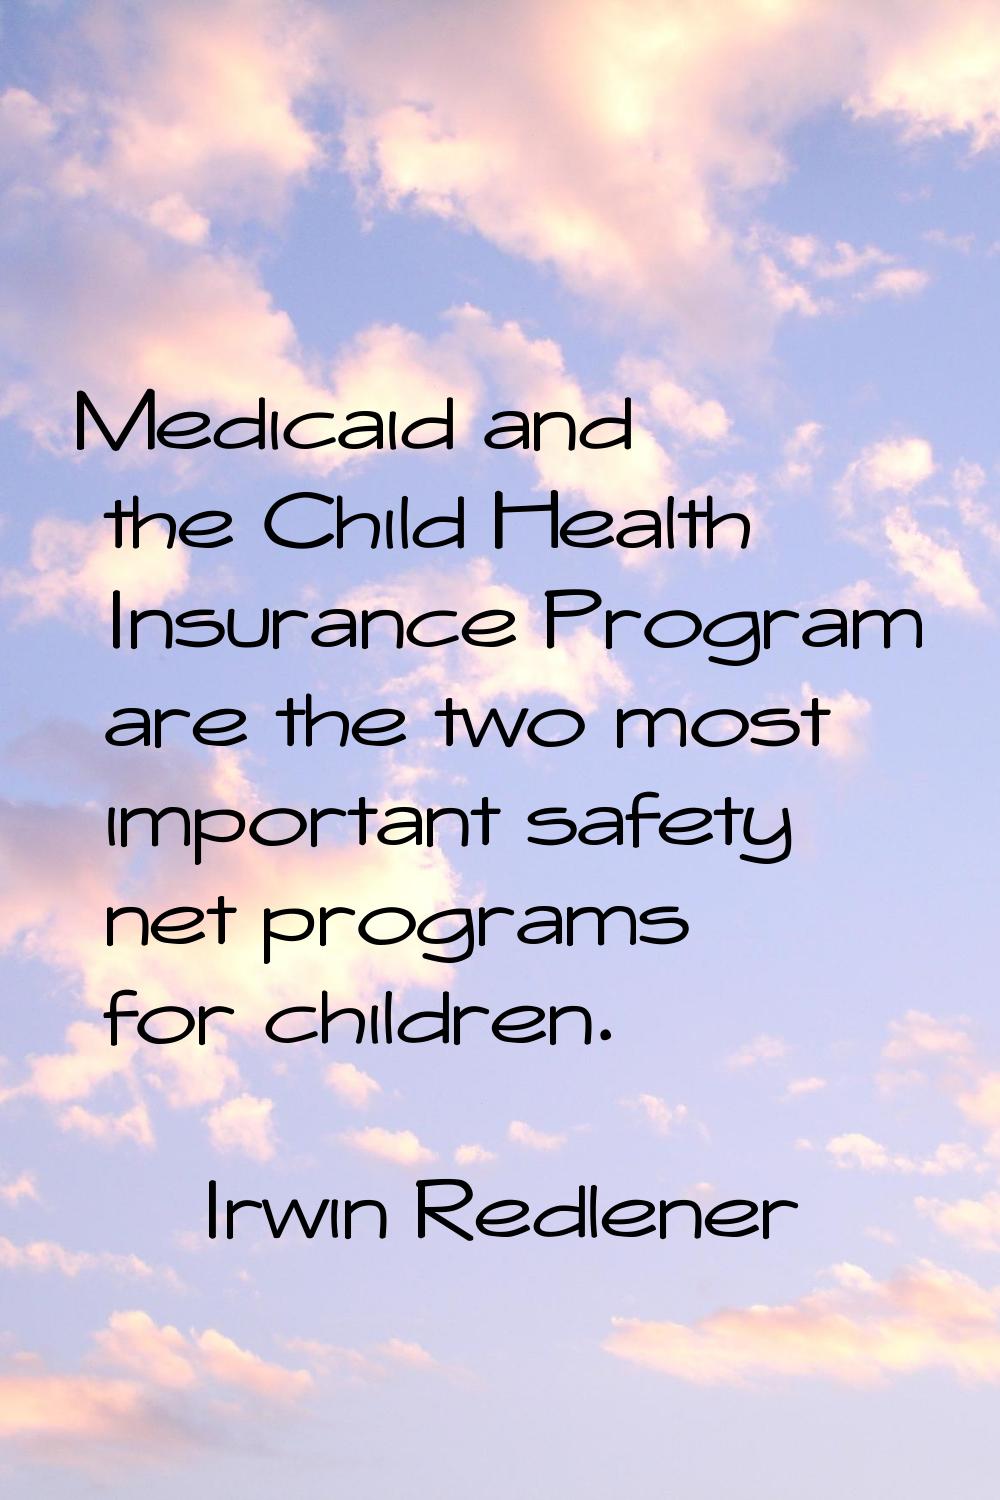 Medicaid and the Child Health Insurance Program are the two most important safety net programs for 